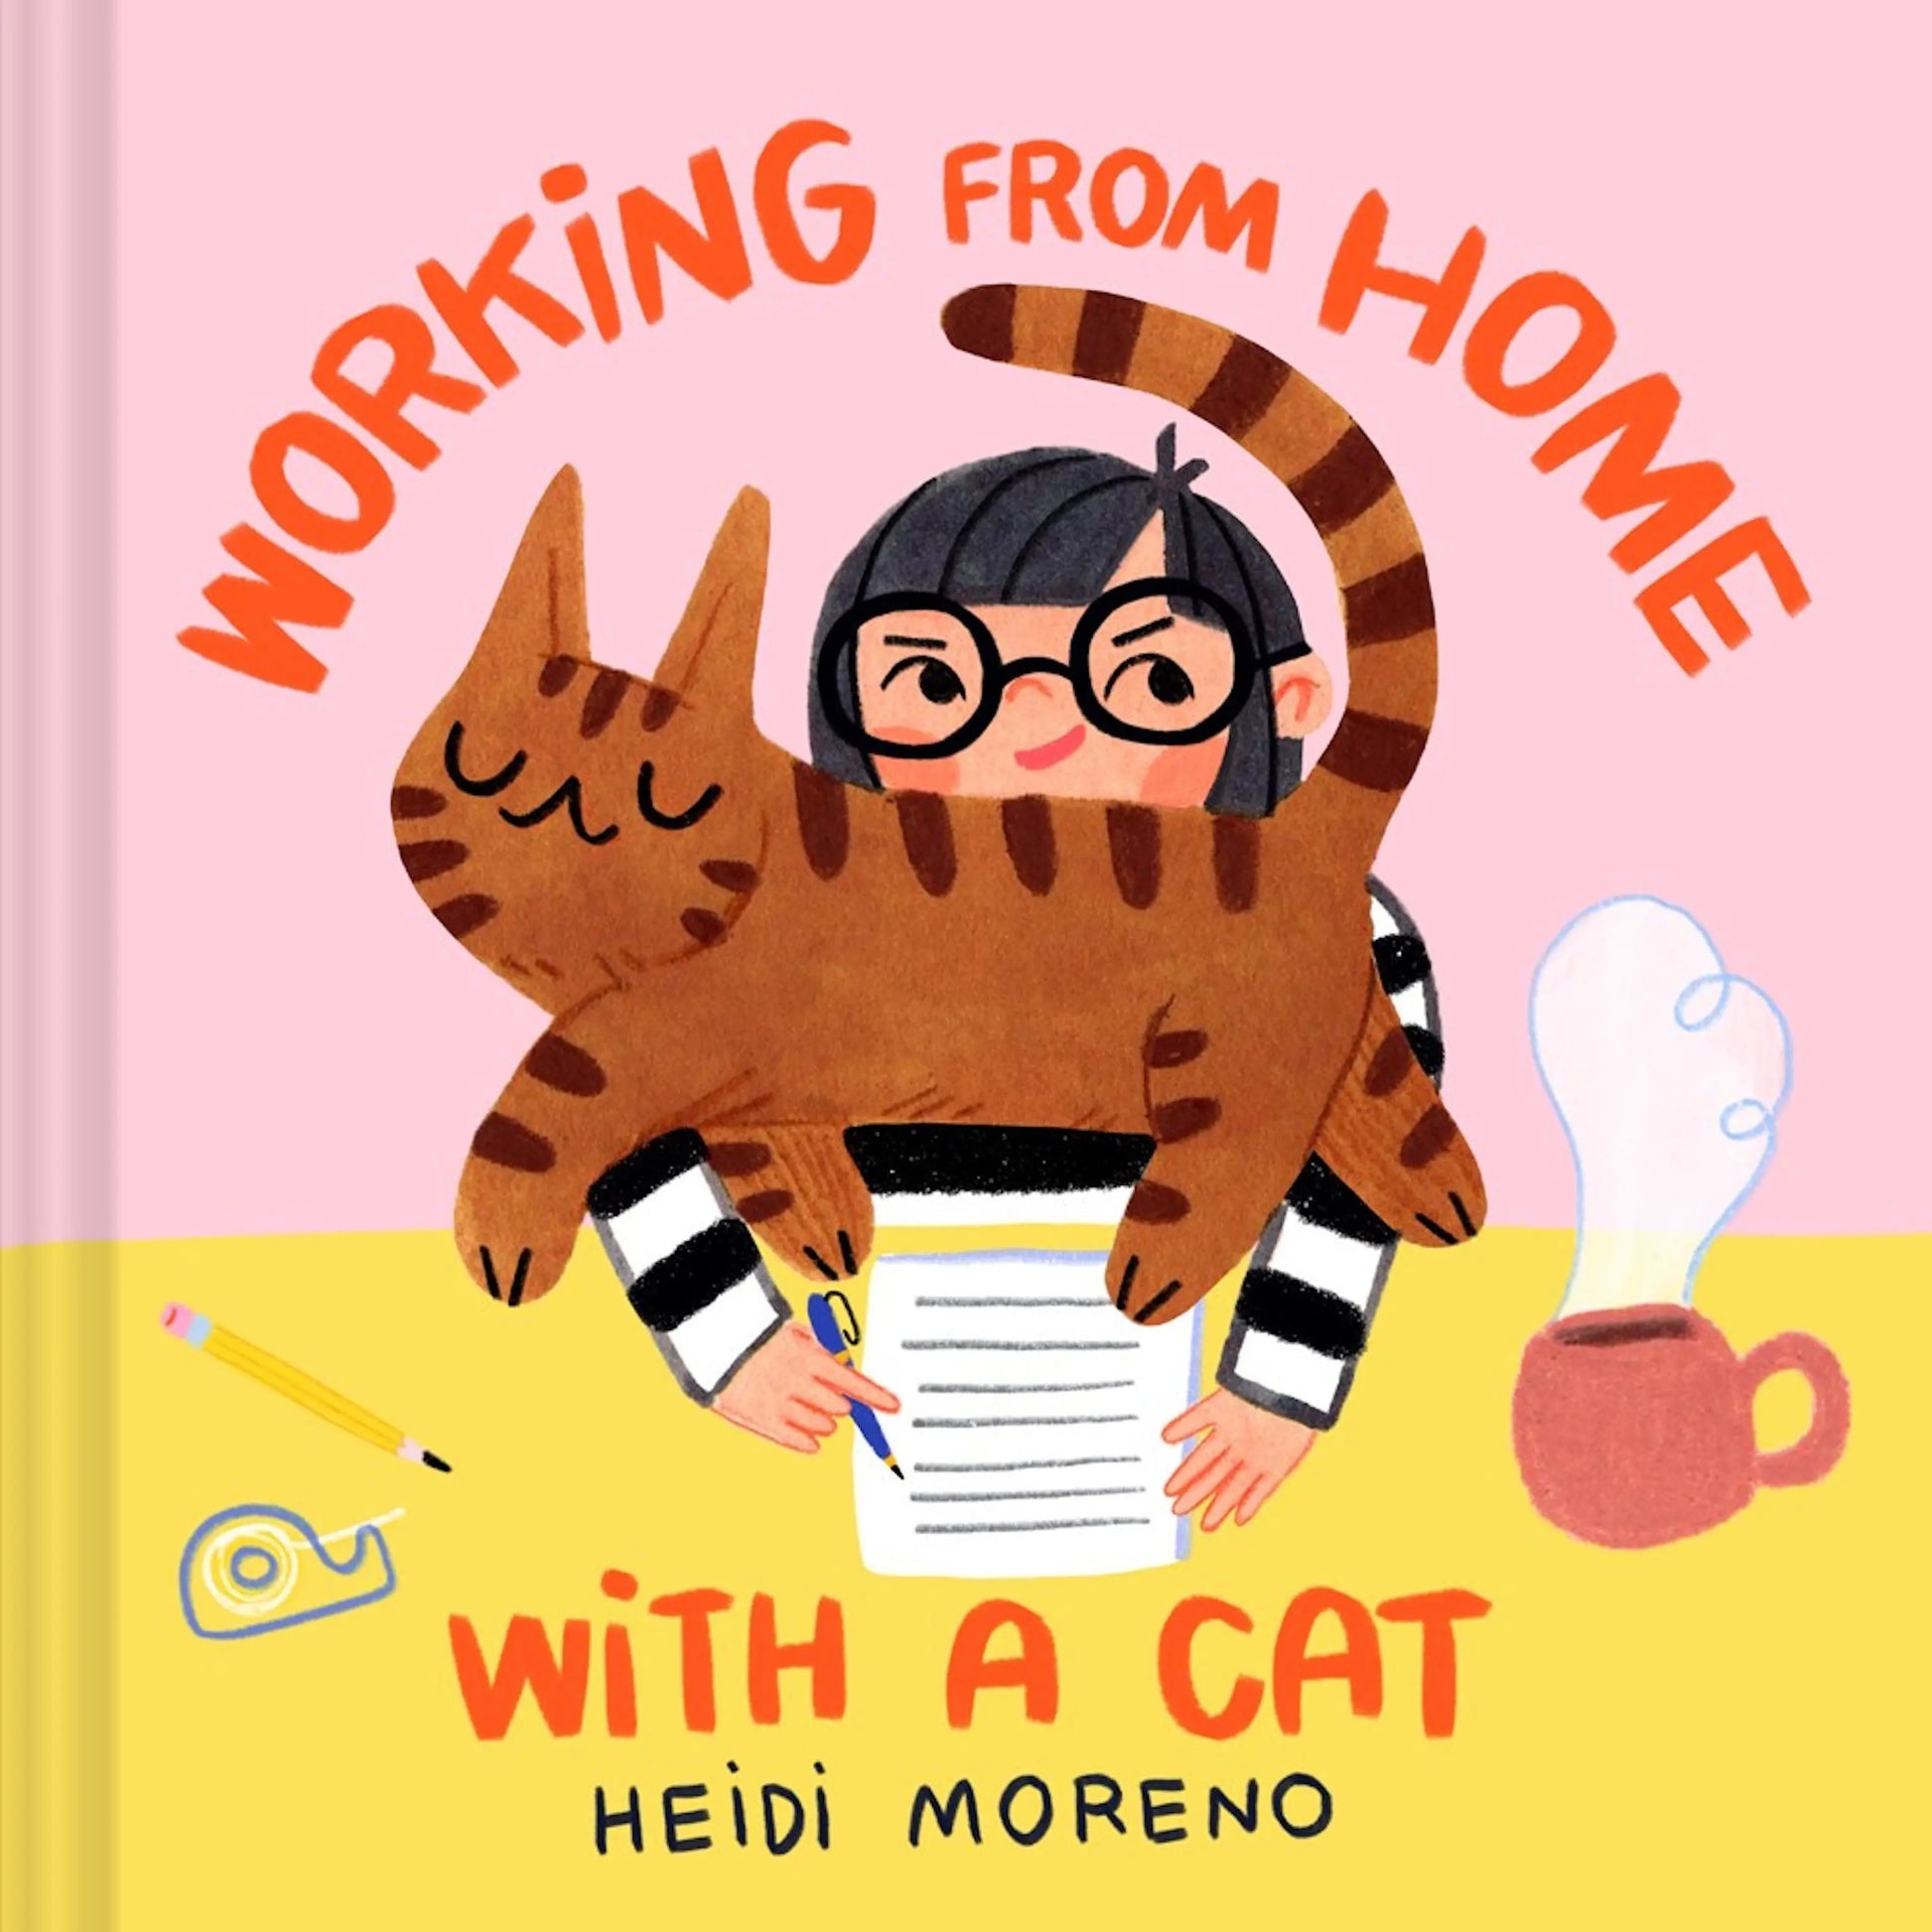 Working From Home With A Cat CHRONICLE BOOKS